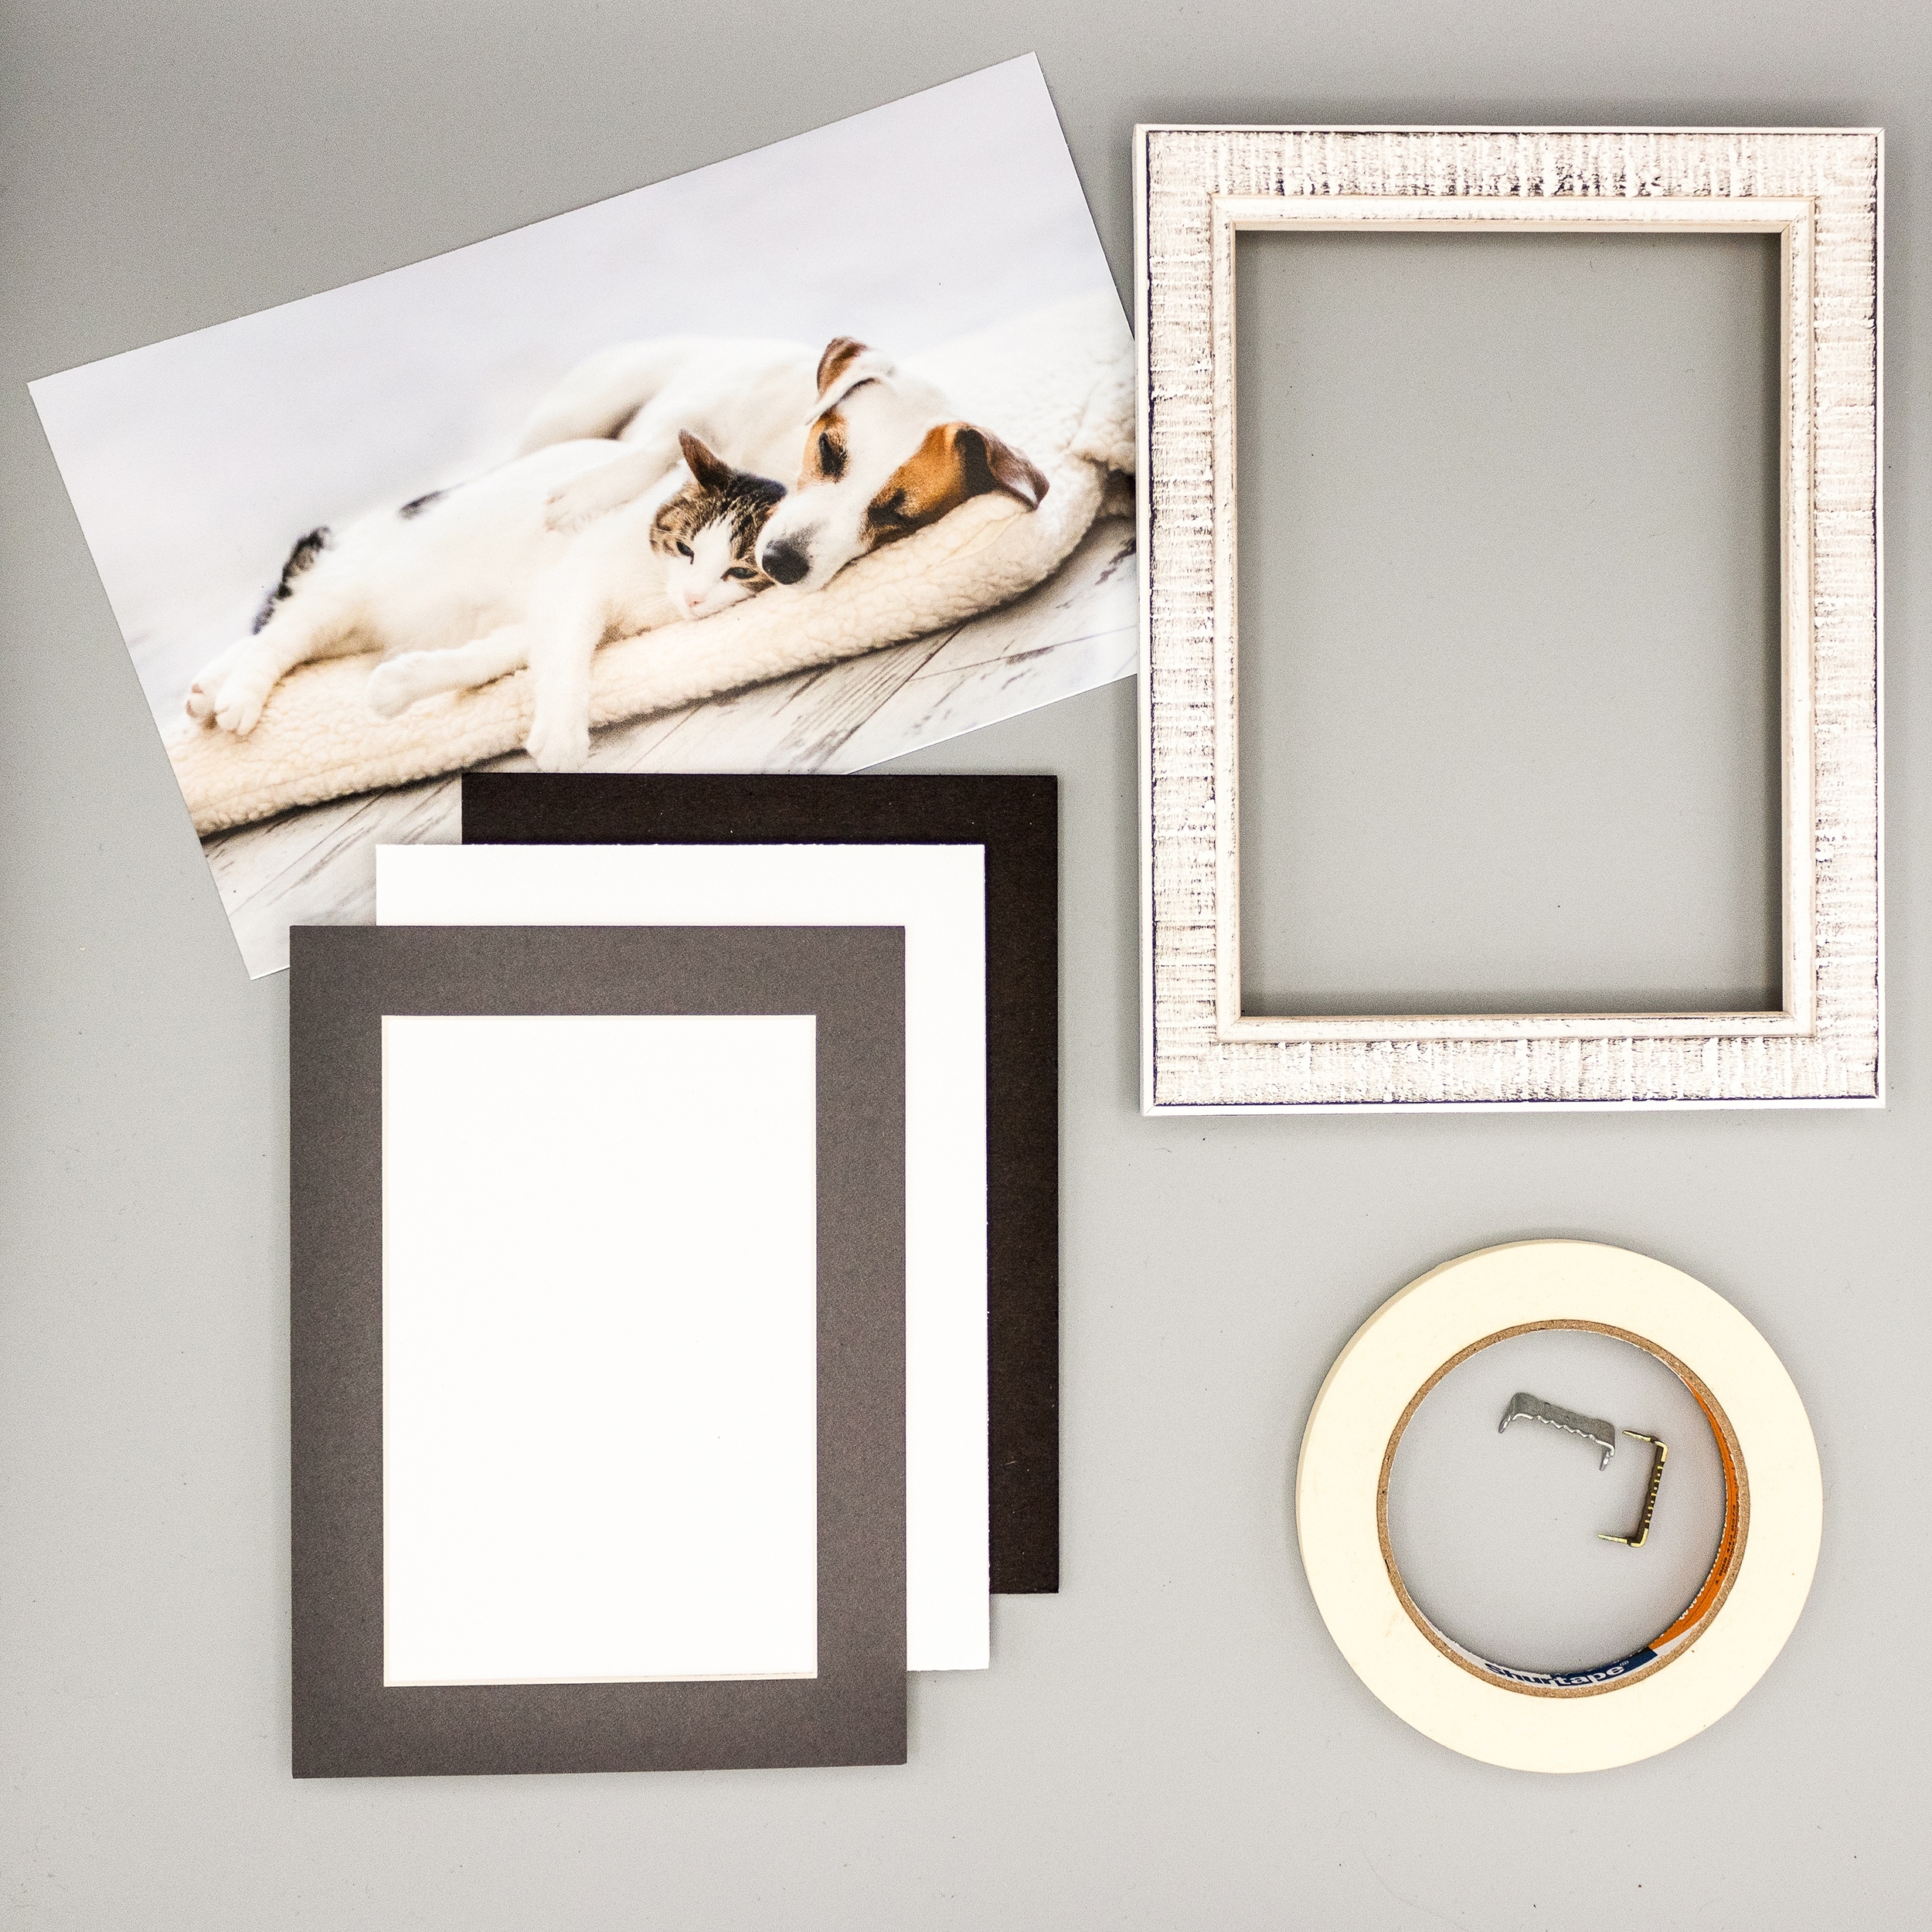 5x7 Mat for 8x10 Frame - Precut Mat Board Acid-Free Charcoal 5x7 Photo  Matte Made to Fit a 8x10 Picture Frame - Bed Bath & Beyond - 38873597